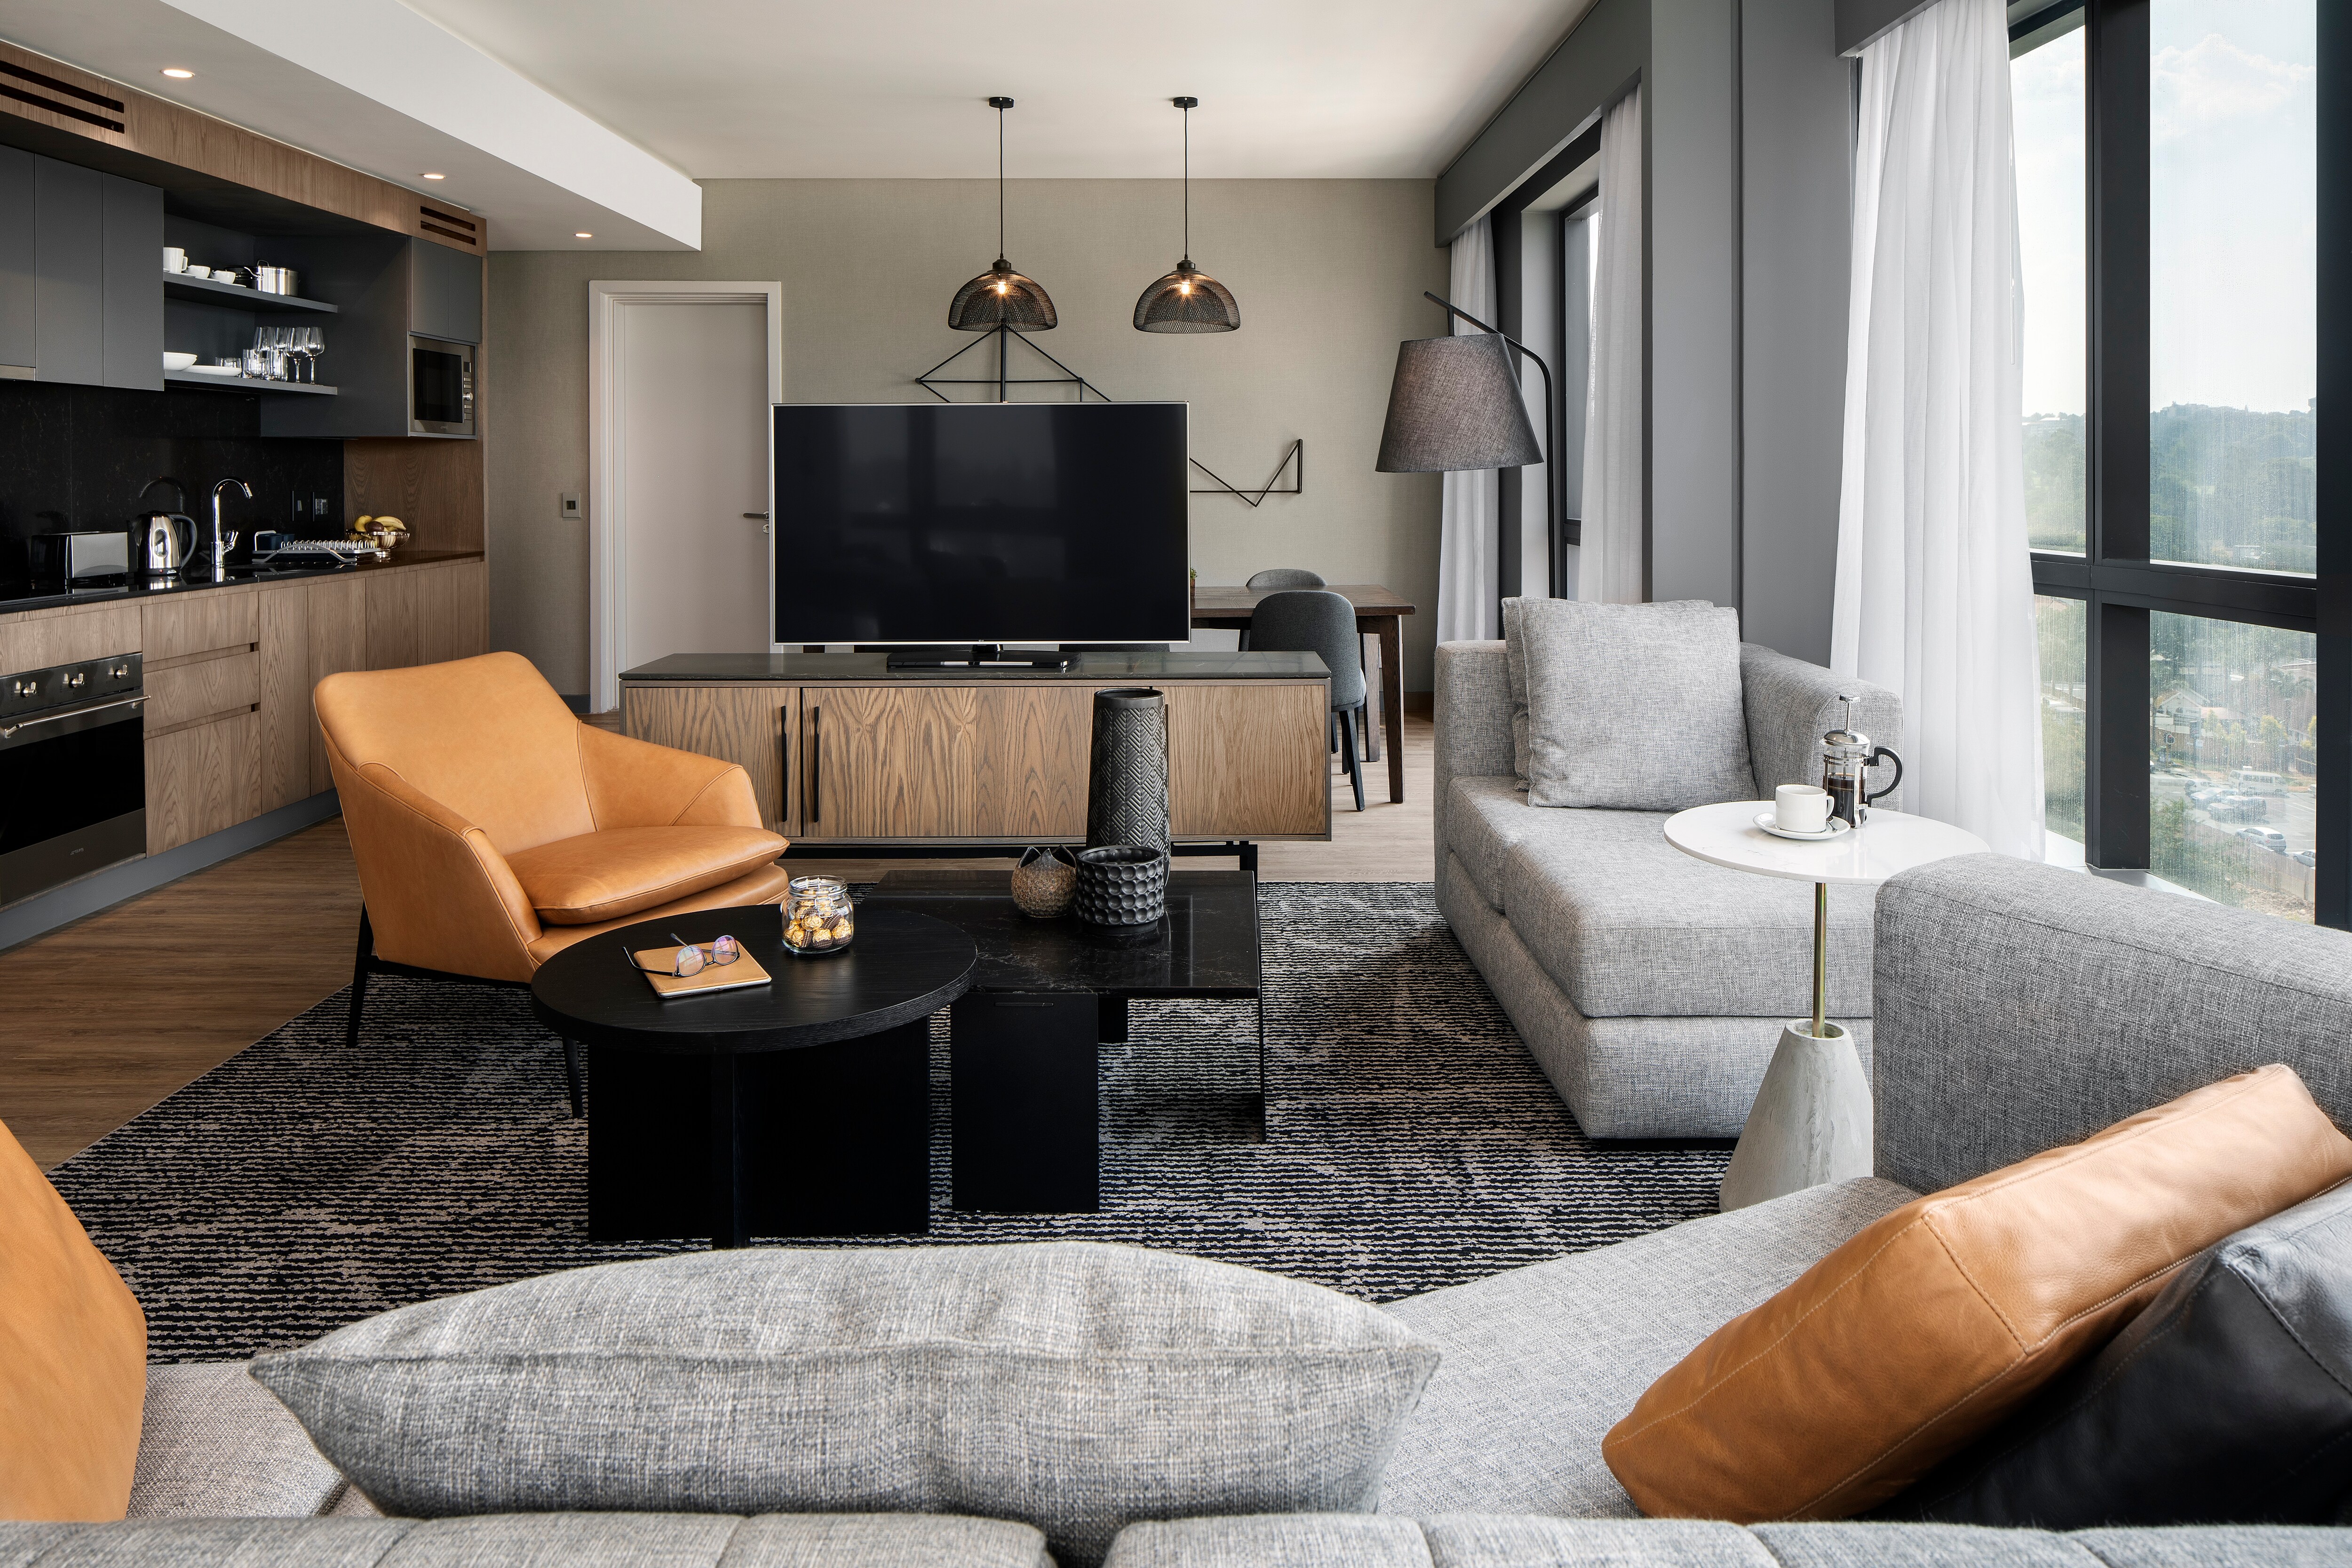 Sophisticated hotel apartments in the heart of Johannesburg